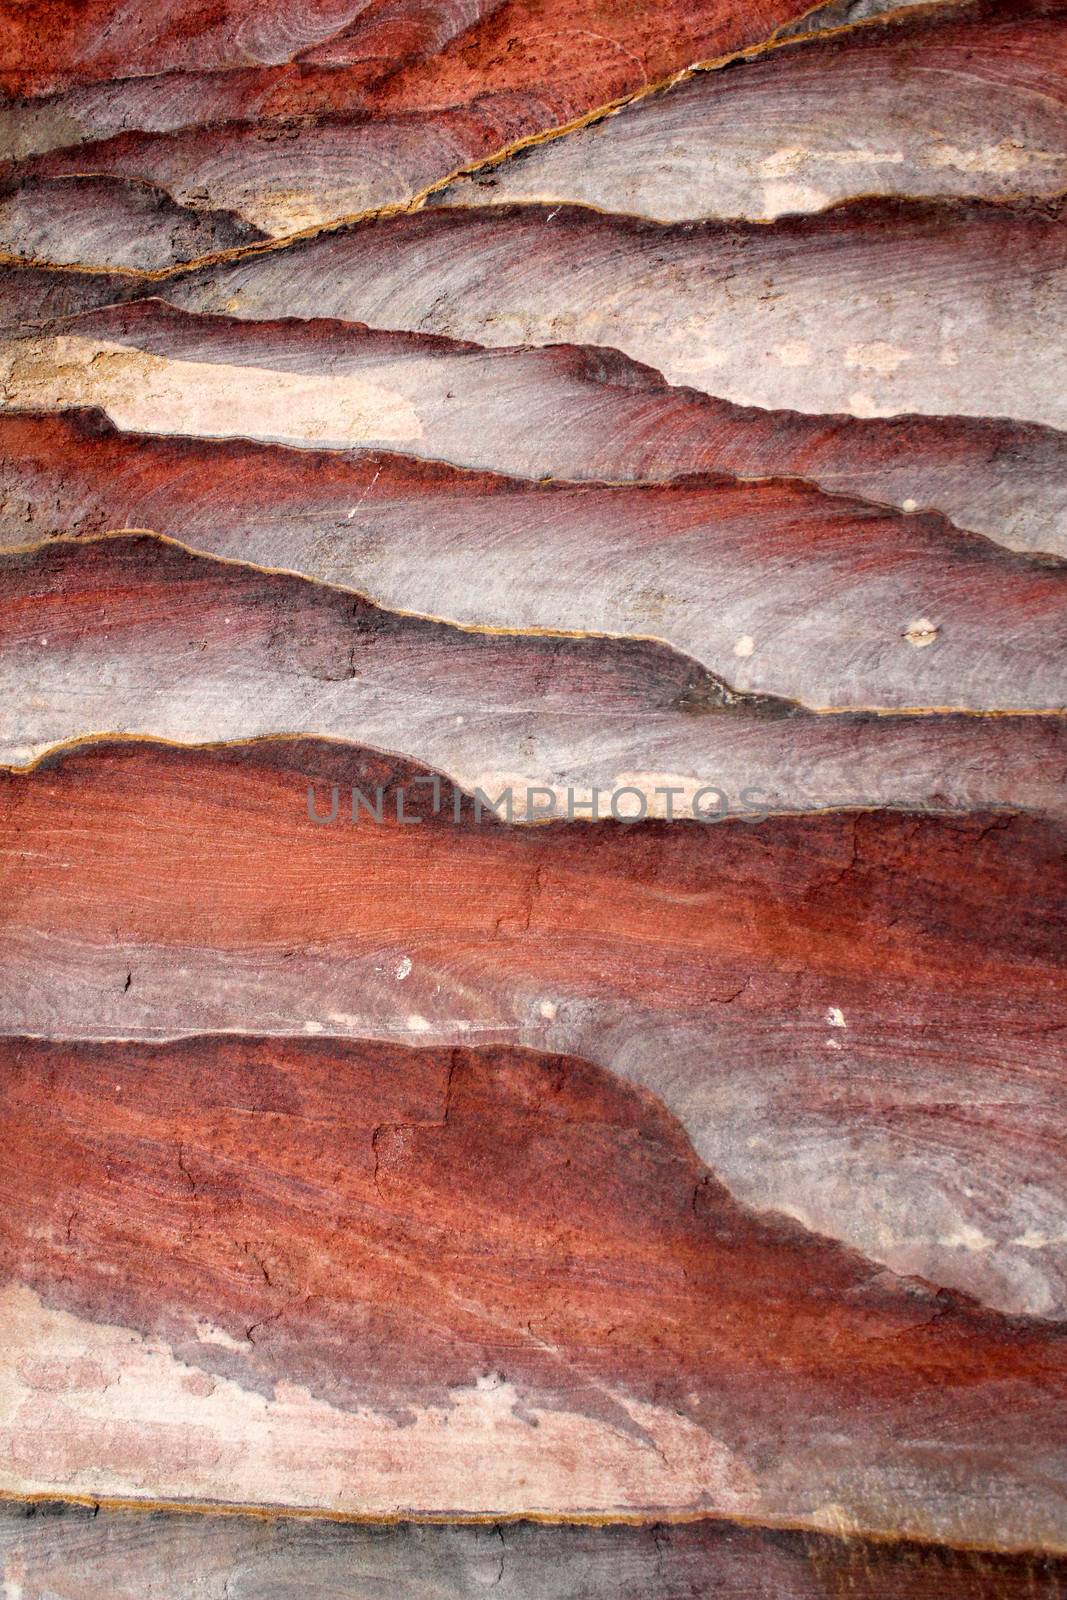 Sandstone gorge abstract pattern formation, Rose City cave, Siq, Petra, Jordan